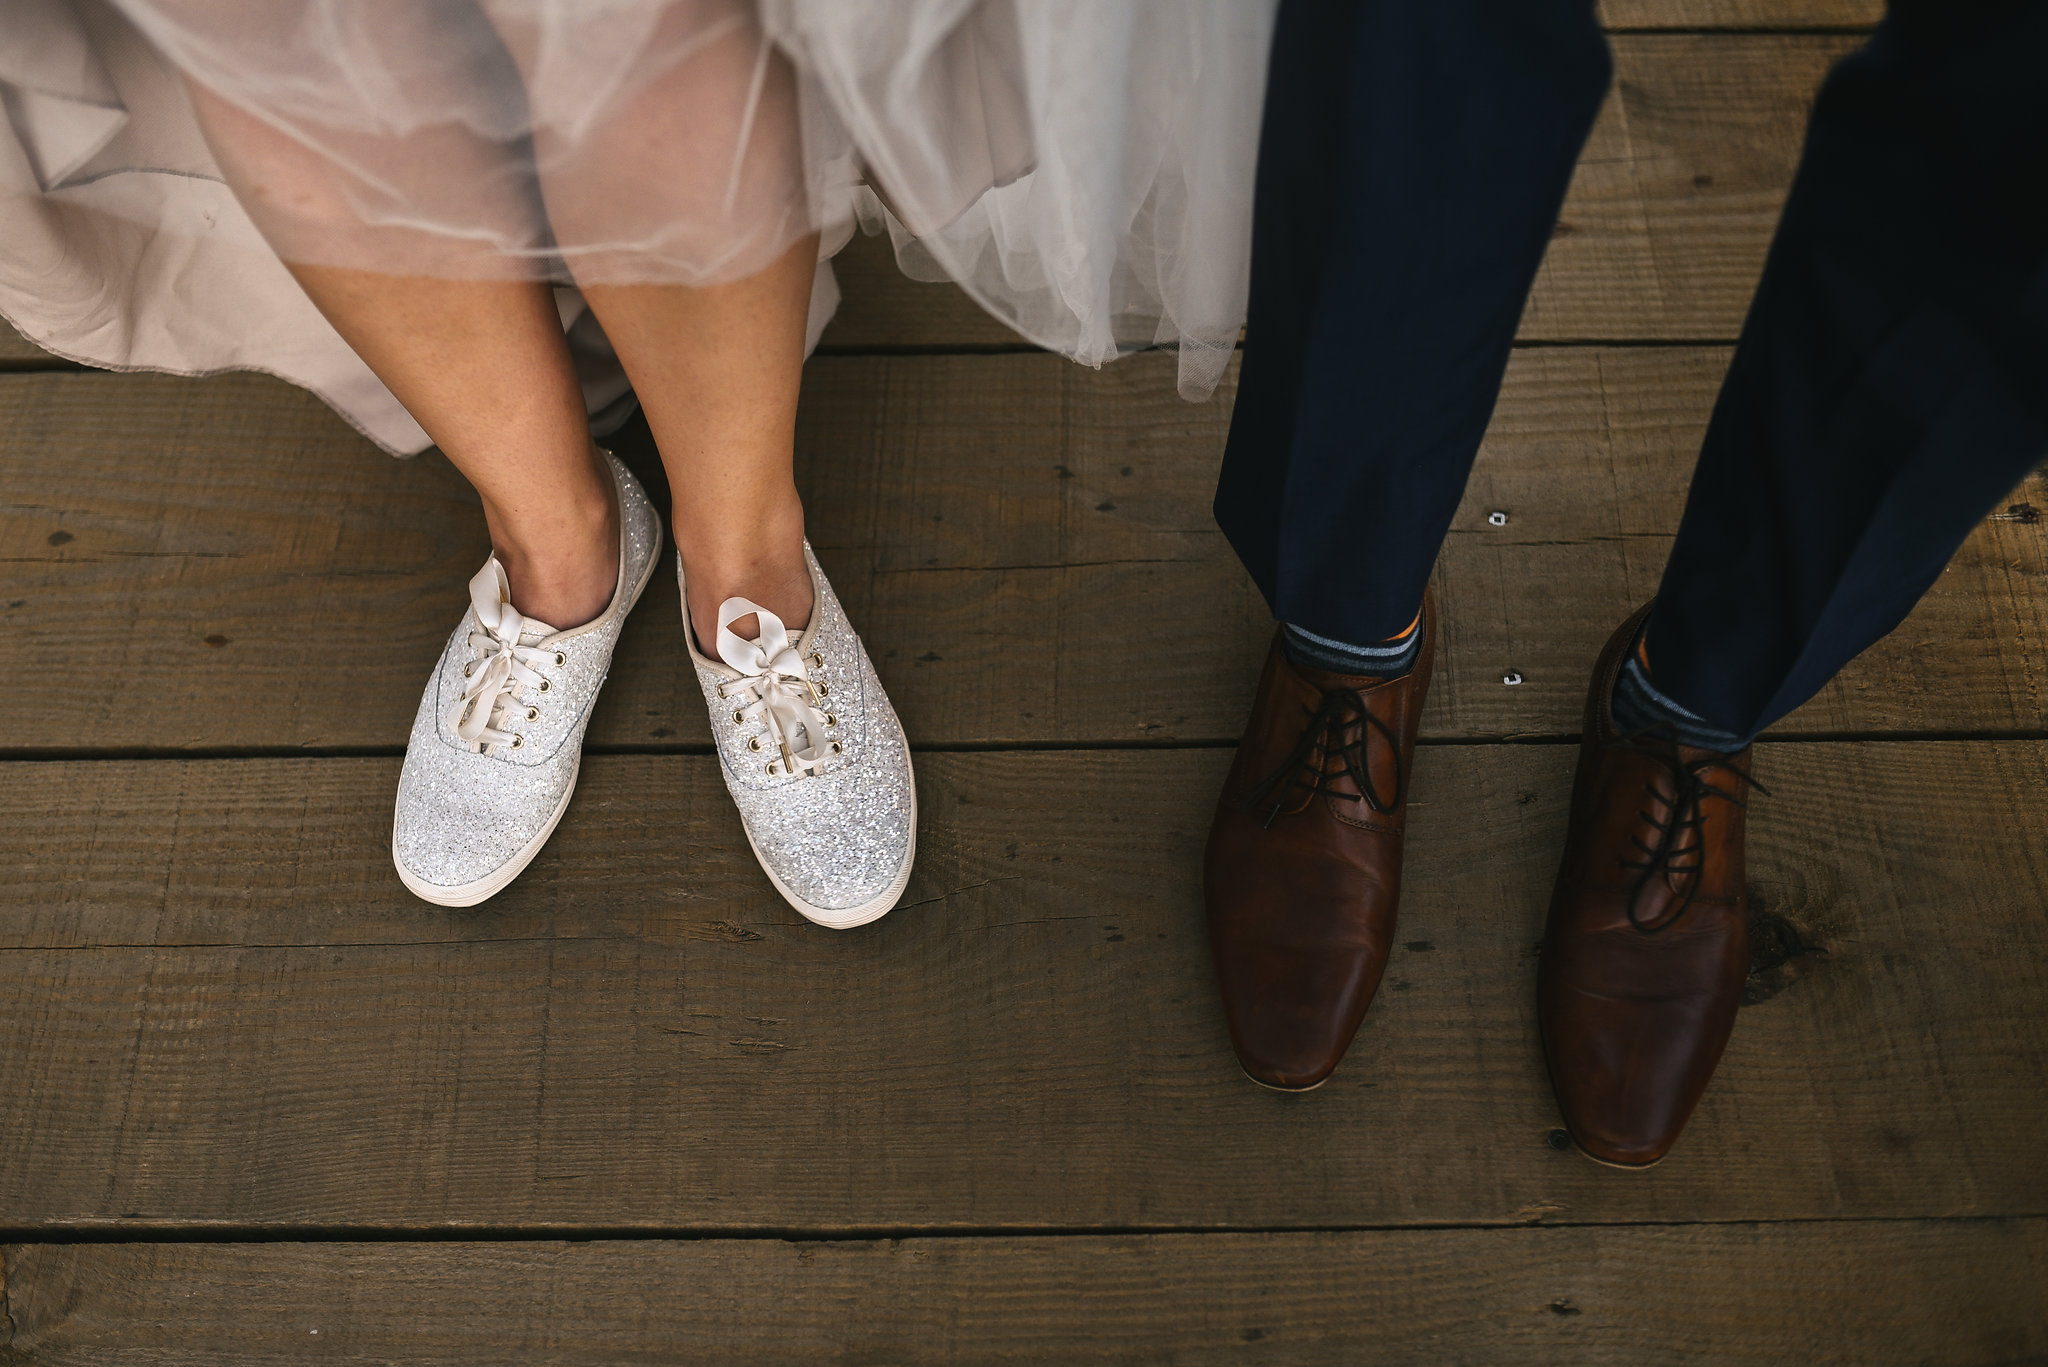  Baltimore, Canton, Modern, Outdoor Reception, Maryland Wedding Photographer, Romantic, Classic, Boston Street Pier Park, Shoes of bride and groom, glittery Keds sneakers, Stripped socks 